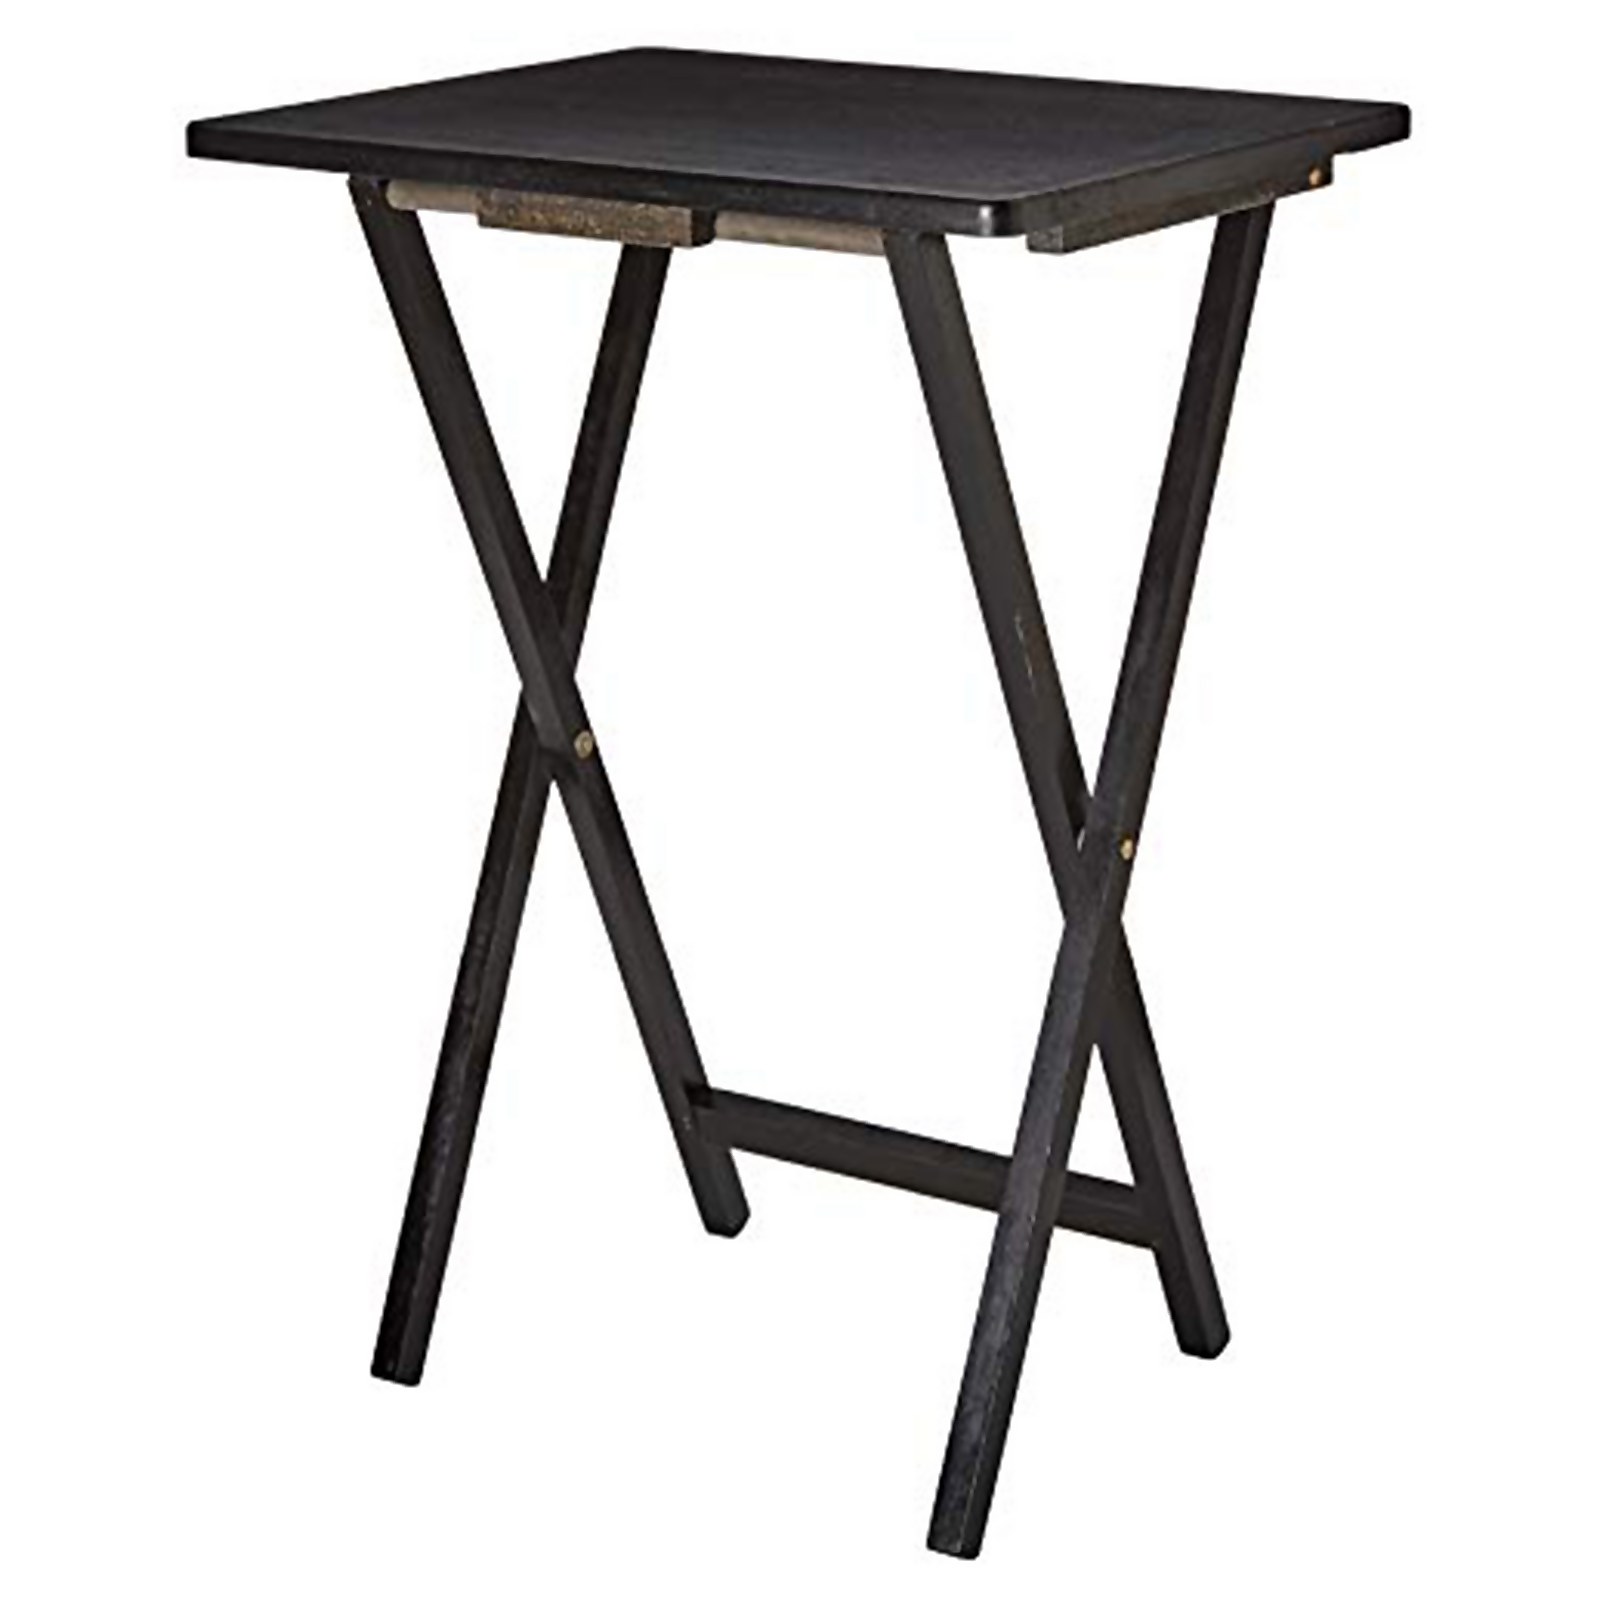 Photo of Folding Wooden Table - Black